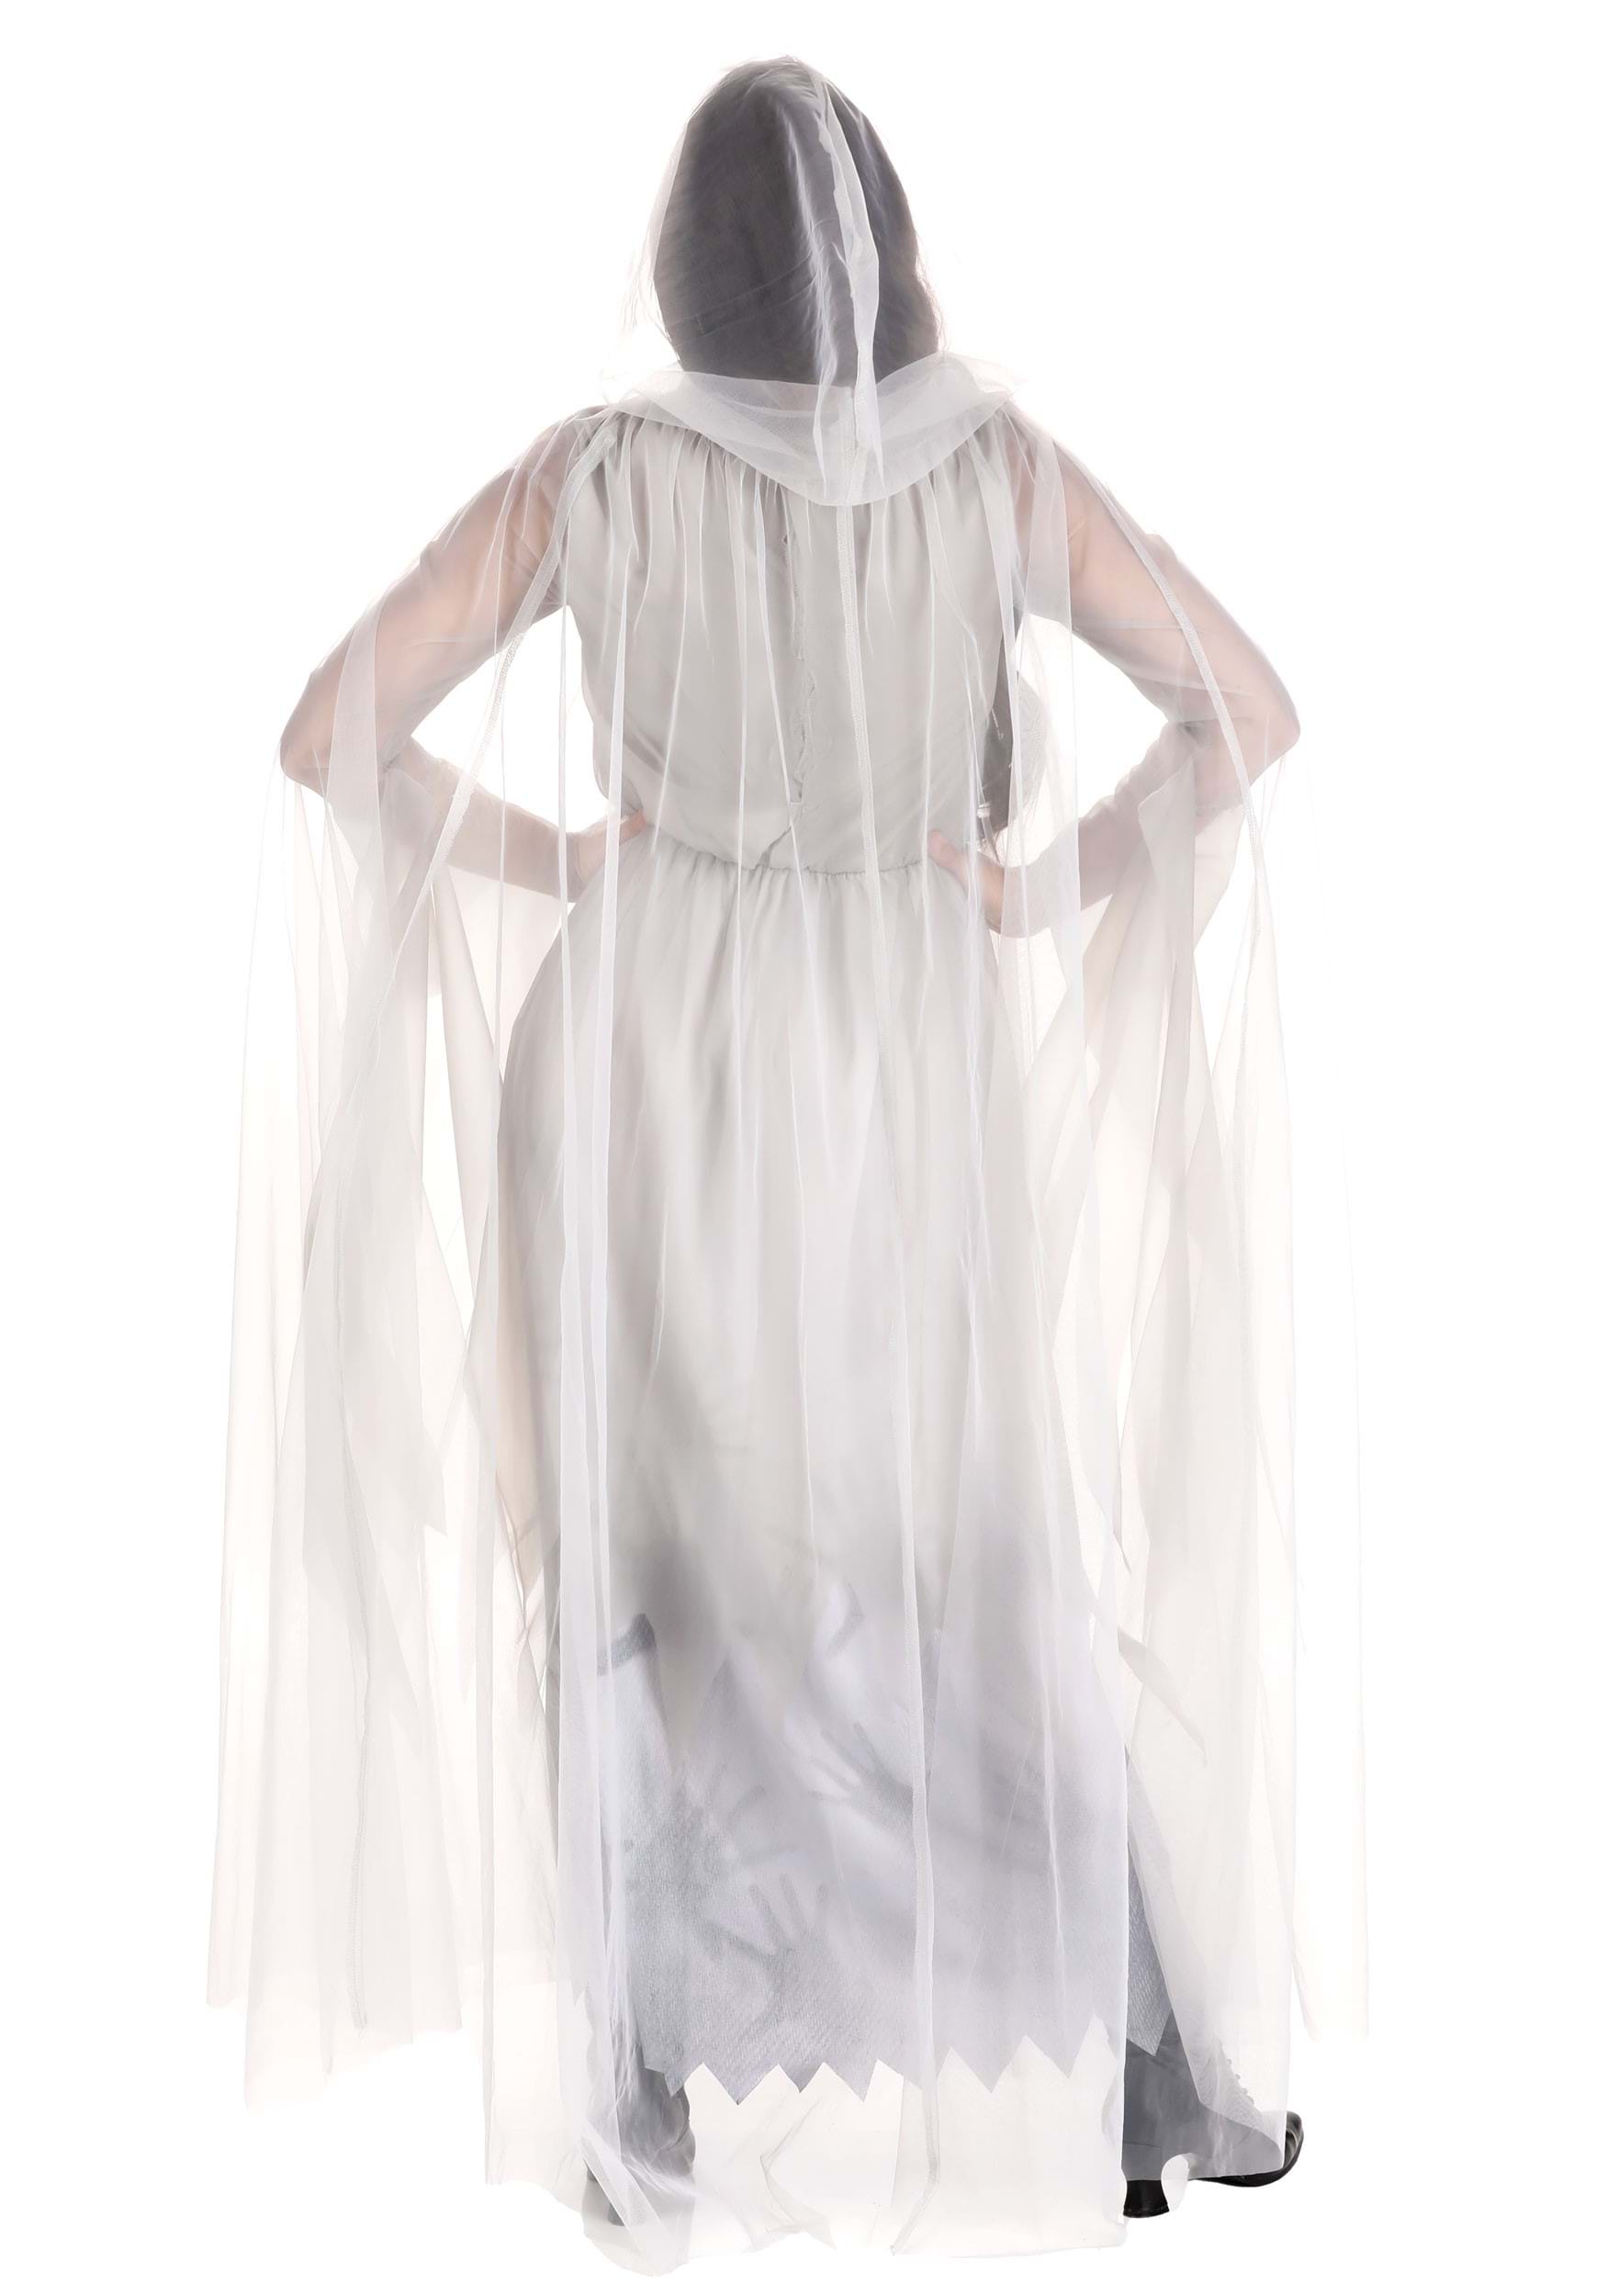 Adult Lady in White Ghost Costume